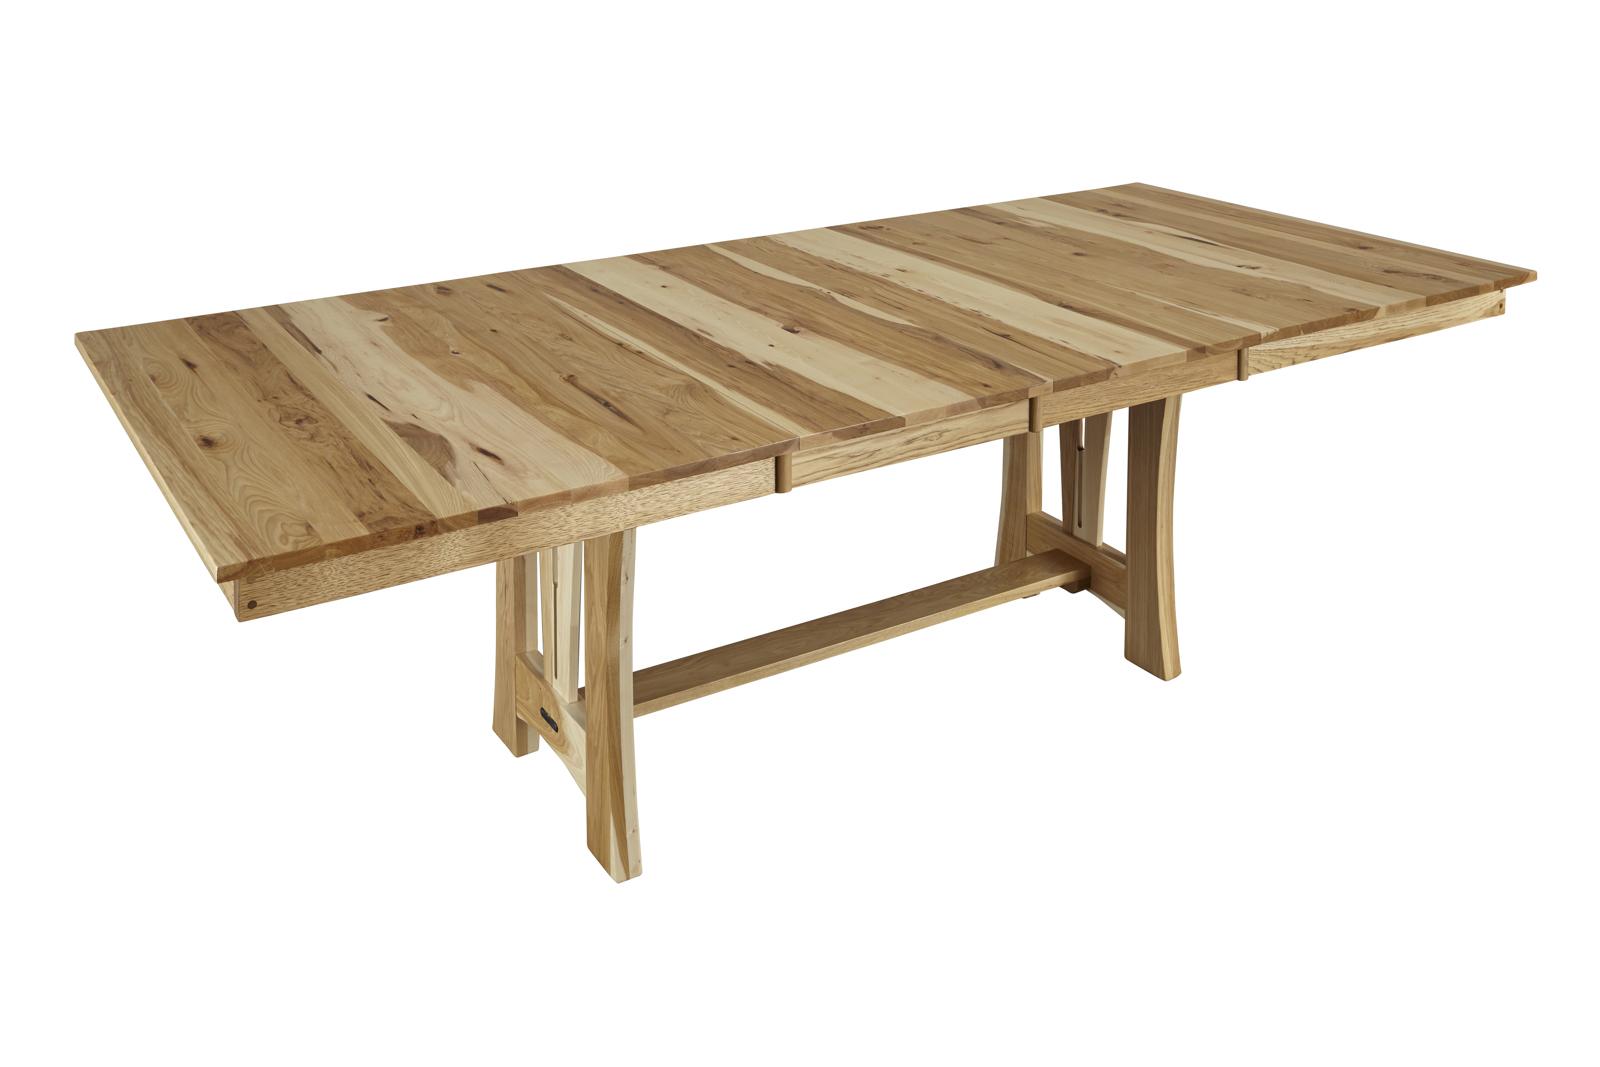 Rustic Dining Table Cattail Bungalow Natural CATNT6300 in Natural 